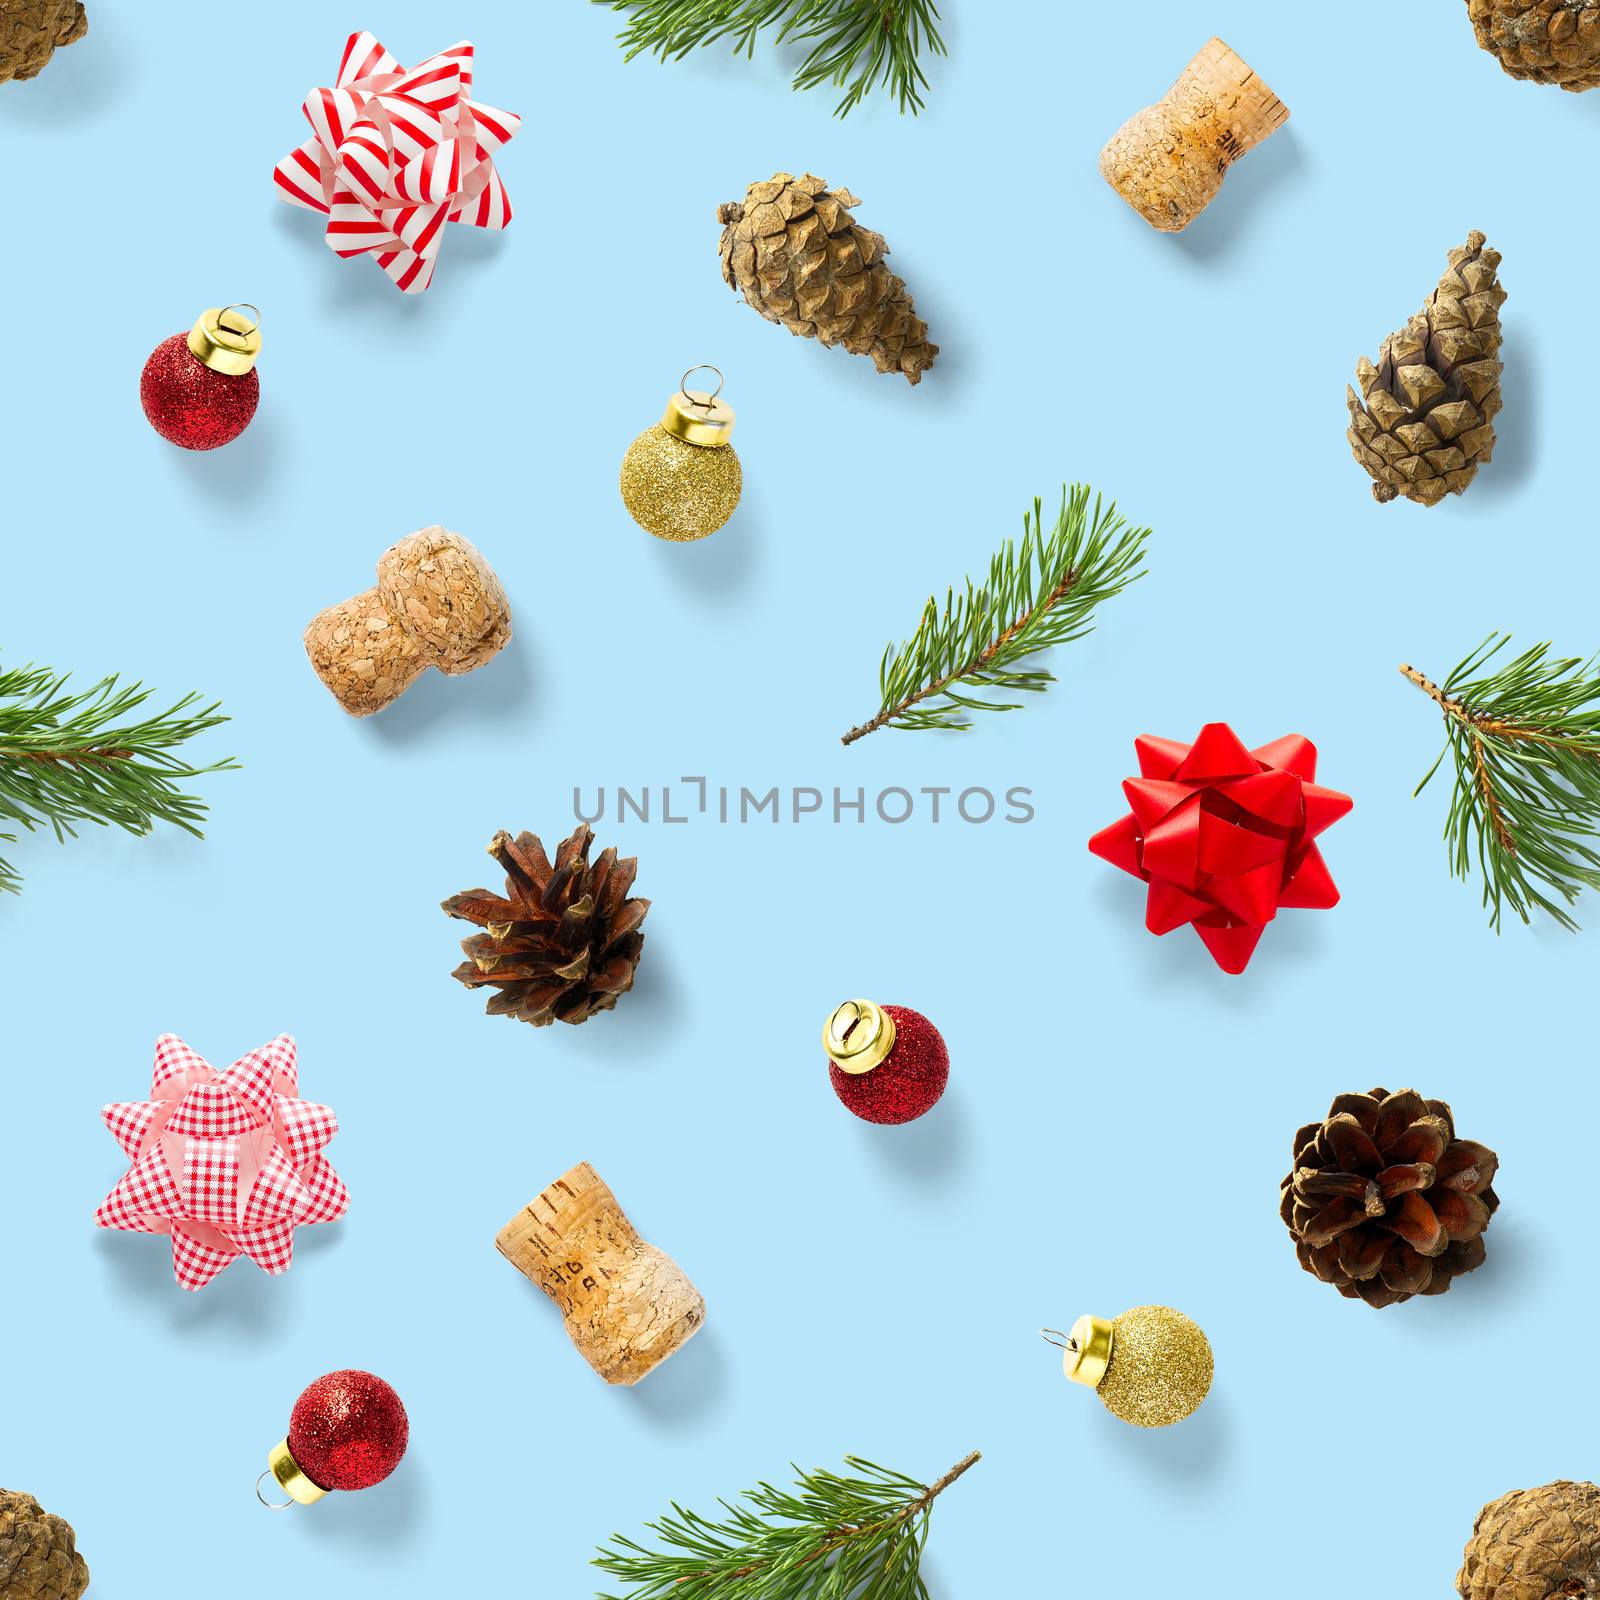 Seamless regular creative Christmas pattern with New Year decorations on blue background. xmas Modern Seamless pattern made from christmas decorations. Photo quality pattern for fabric, prints, wallpapers, banners or creative design works.